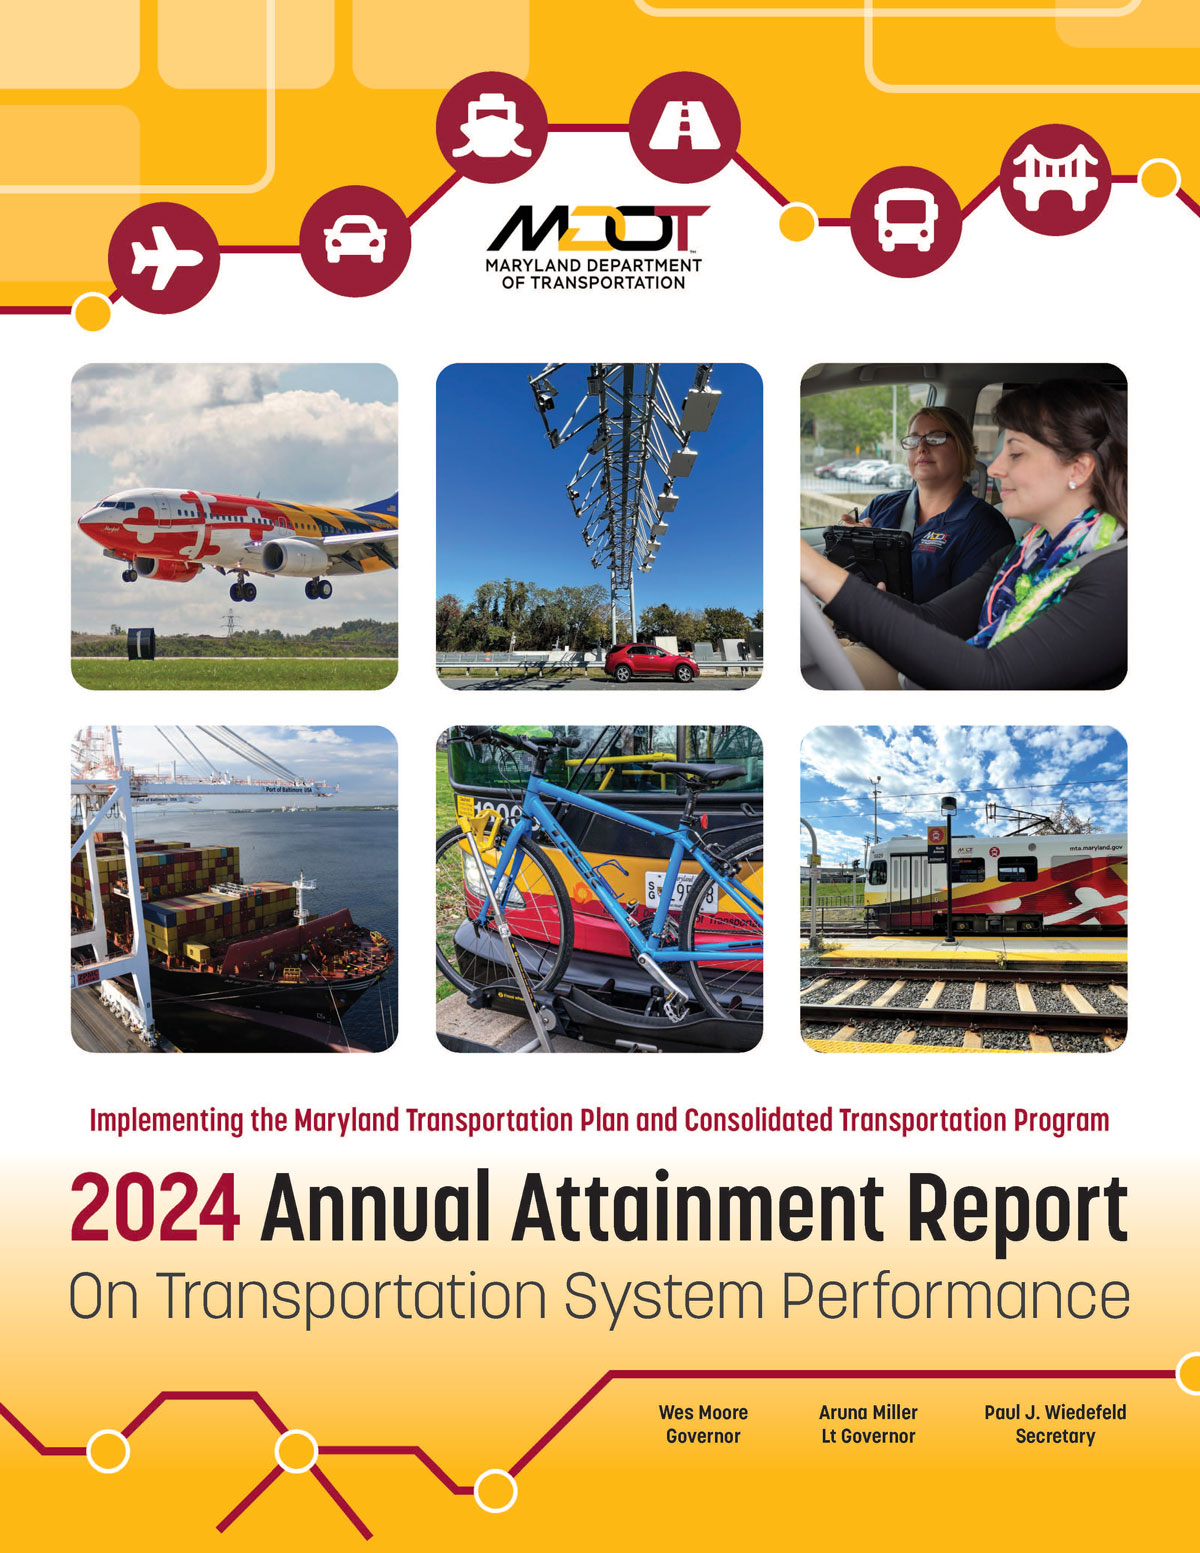 The cover of the 2024 Attainment Report